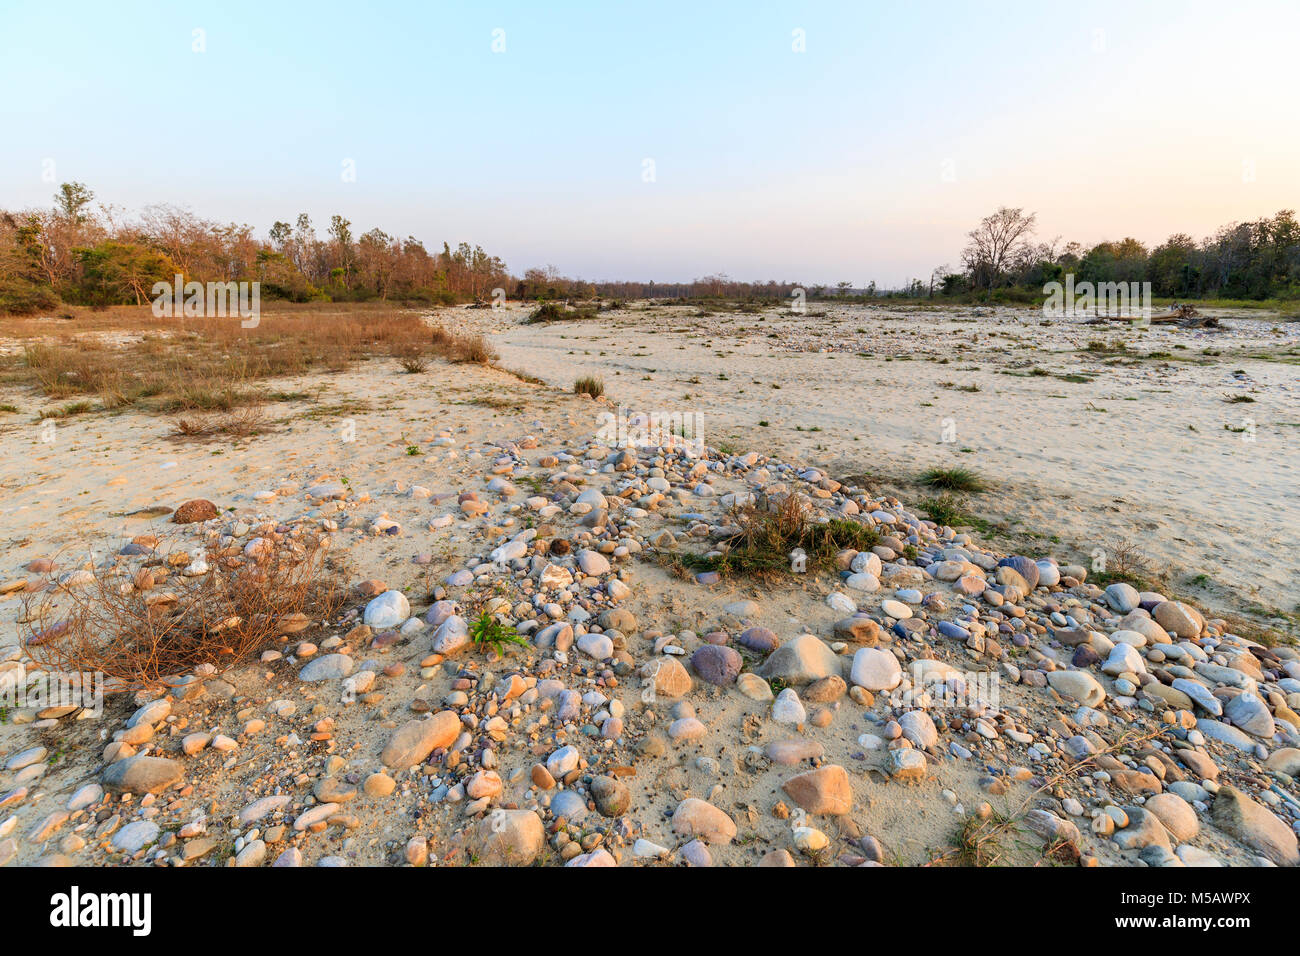 North Indian ecology: View of dried up riverbed in Jim Corbett National Park wildlife sanctuary, Ramnagar, Uttarakhand State, northern India Stock Photo